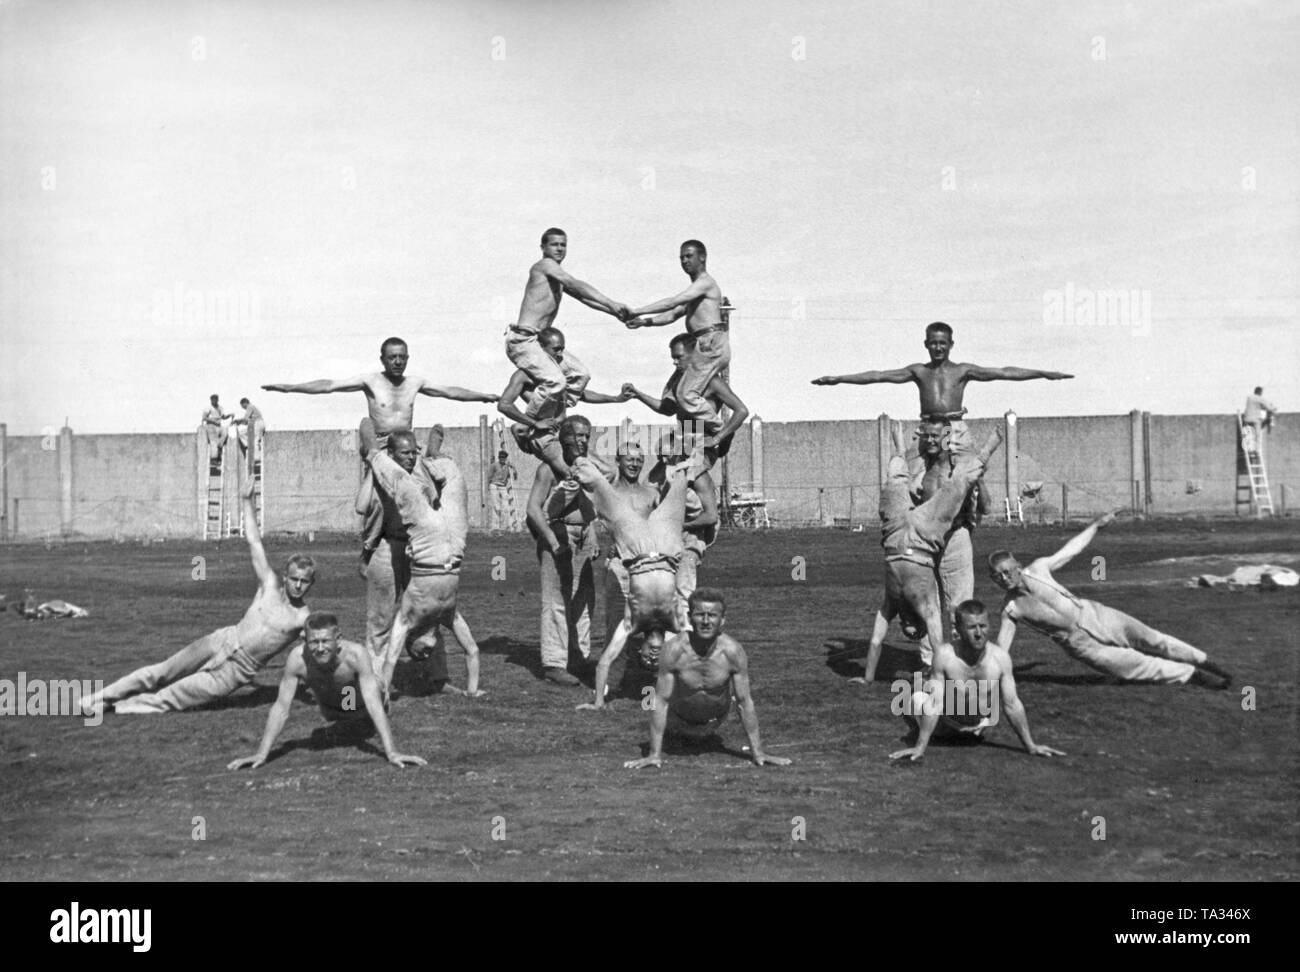 Prisoners doing gymnastics in the concentration camp. In the background the concentration camp wall. This photo, just like many others, was made for Nazi propaganda purposes. Stock Photo